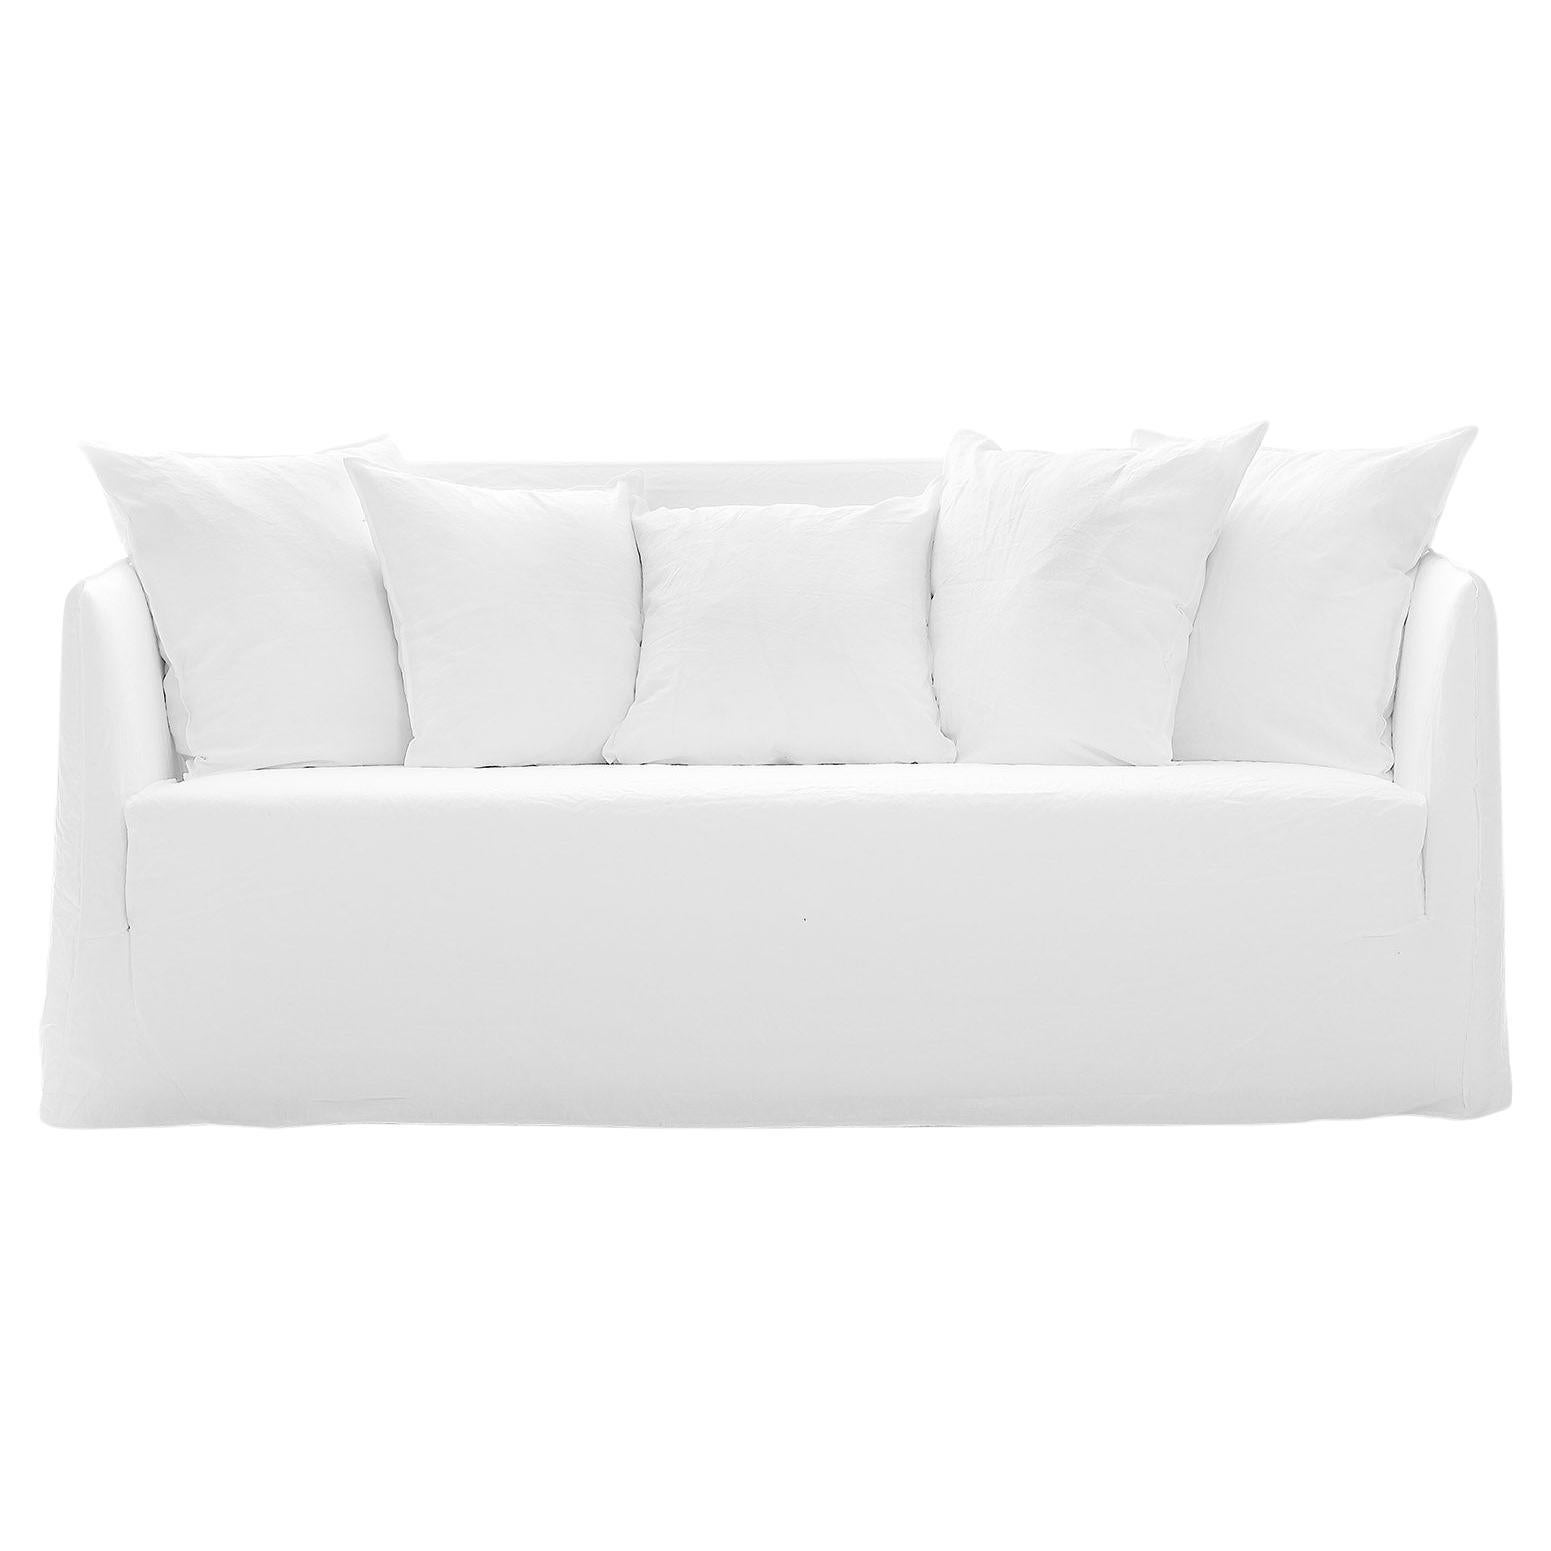 Gervasoni Ghost 10 Sofa in White Linen Upholstery by Paola Navone